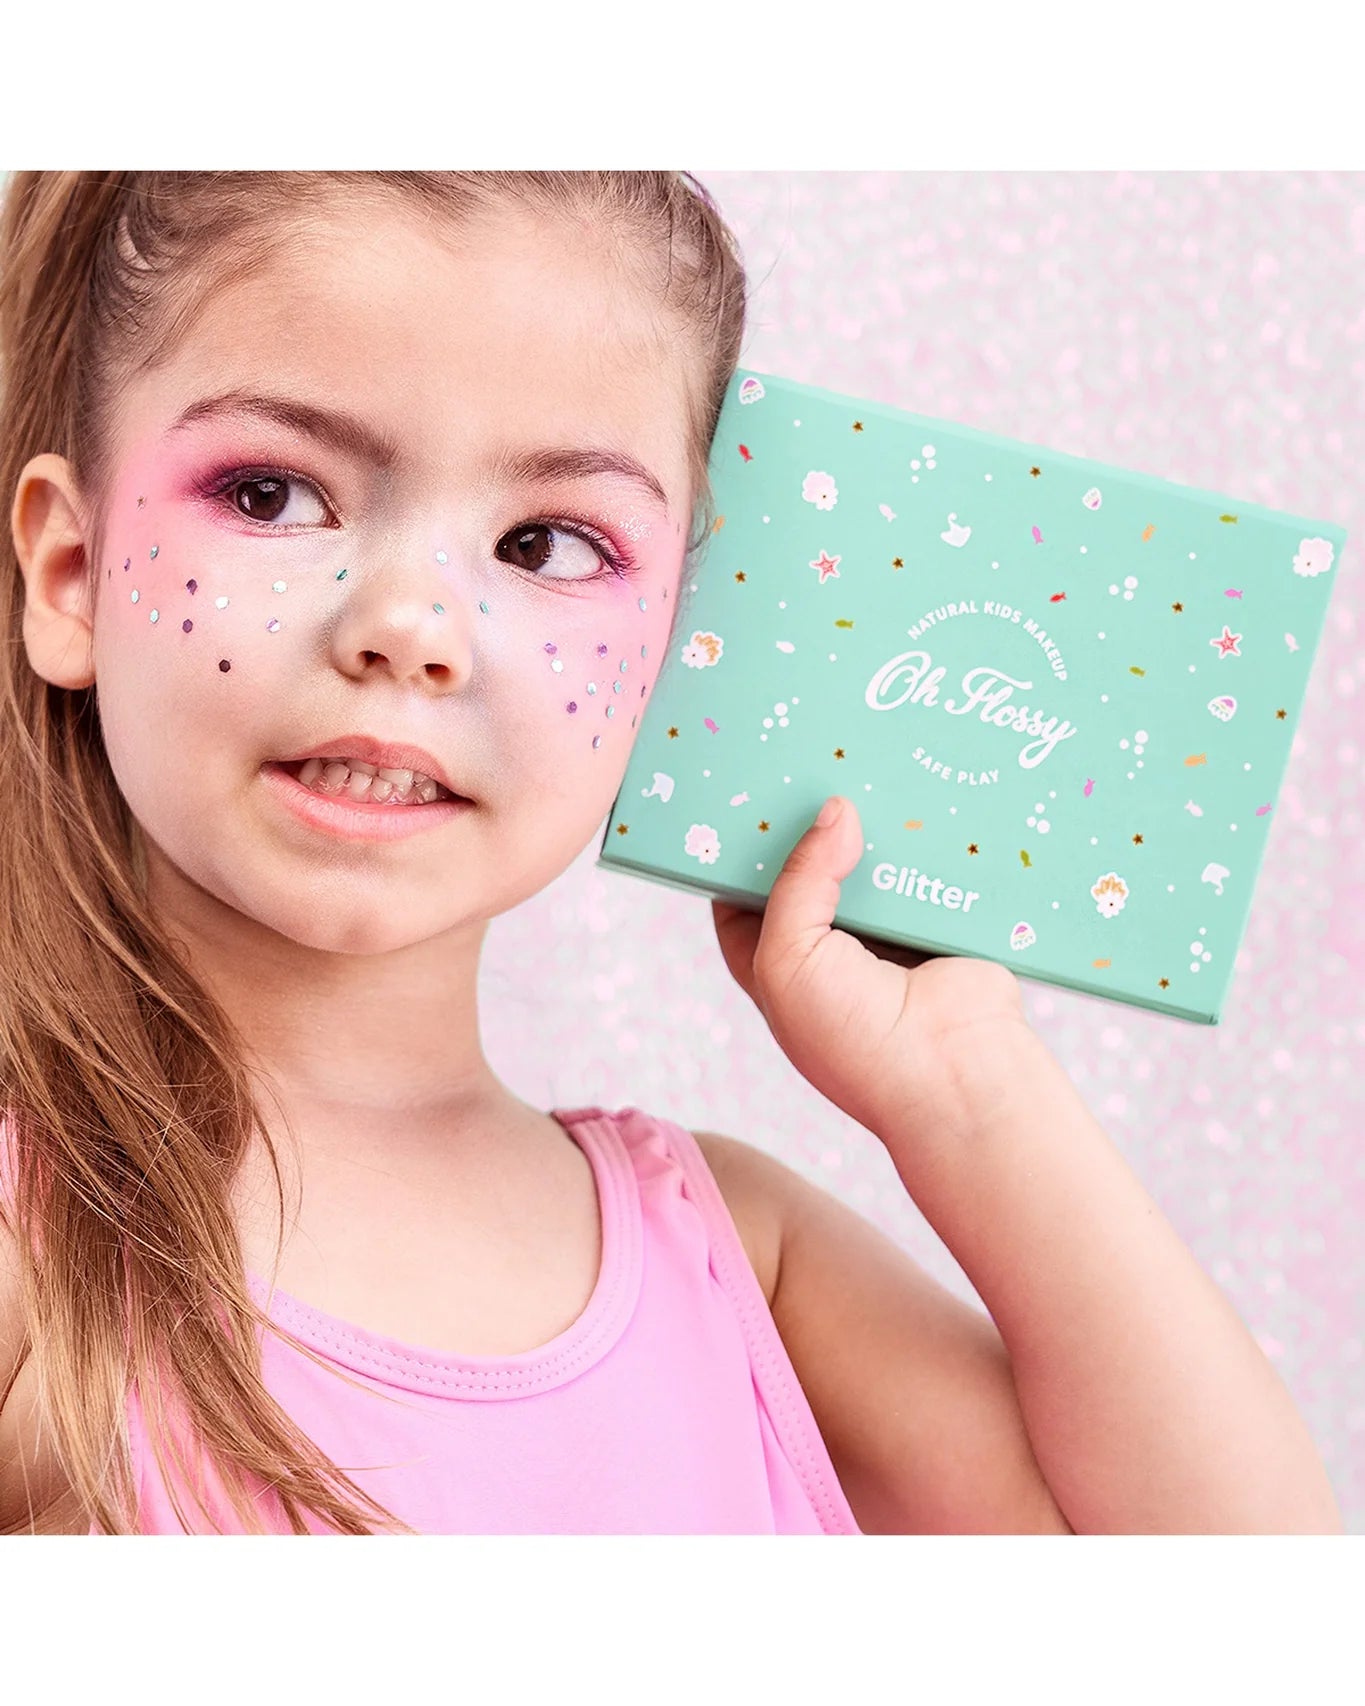 Oh Flossy | Under The Sea Glitter Set